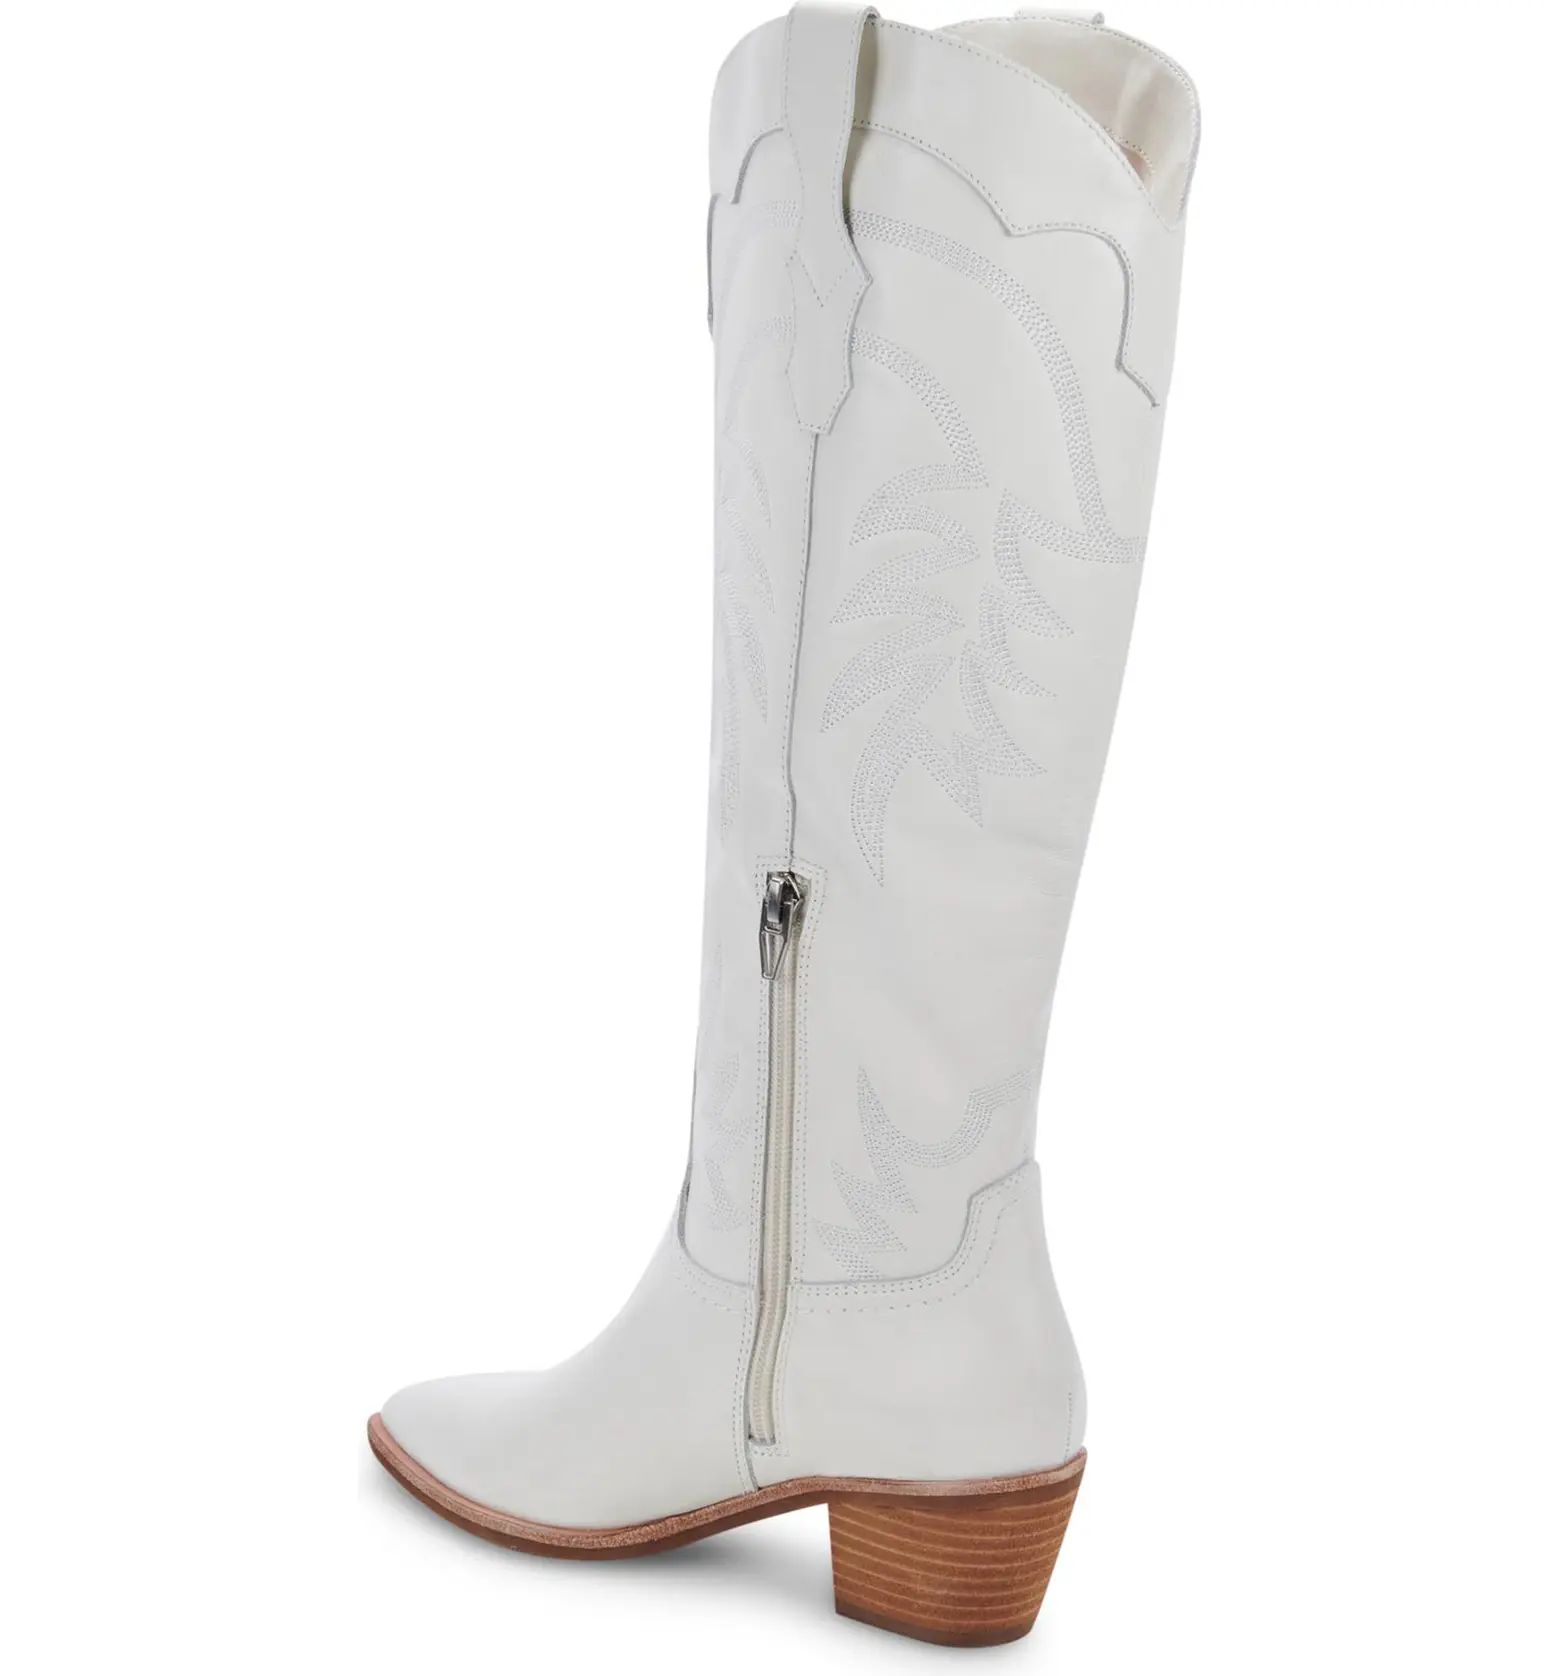 Rating 3.3out of5stars(26)26Solida Western BootDOLCE VITA | Nordstrom